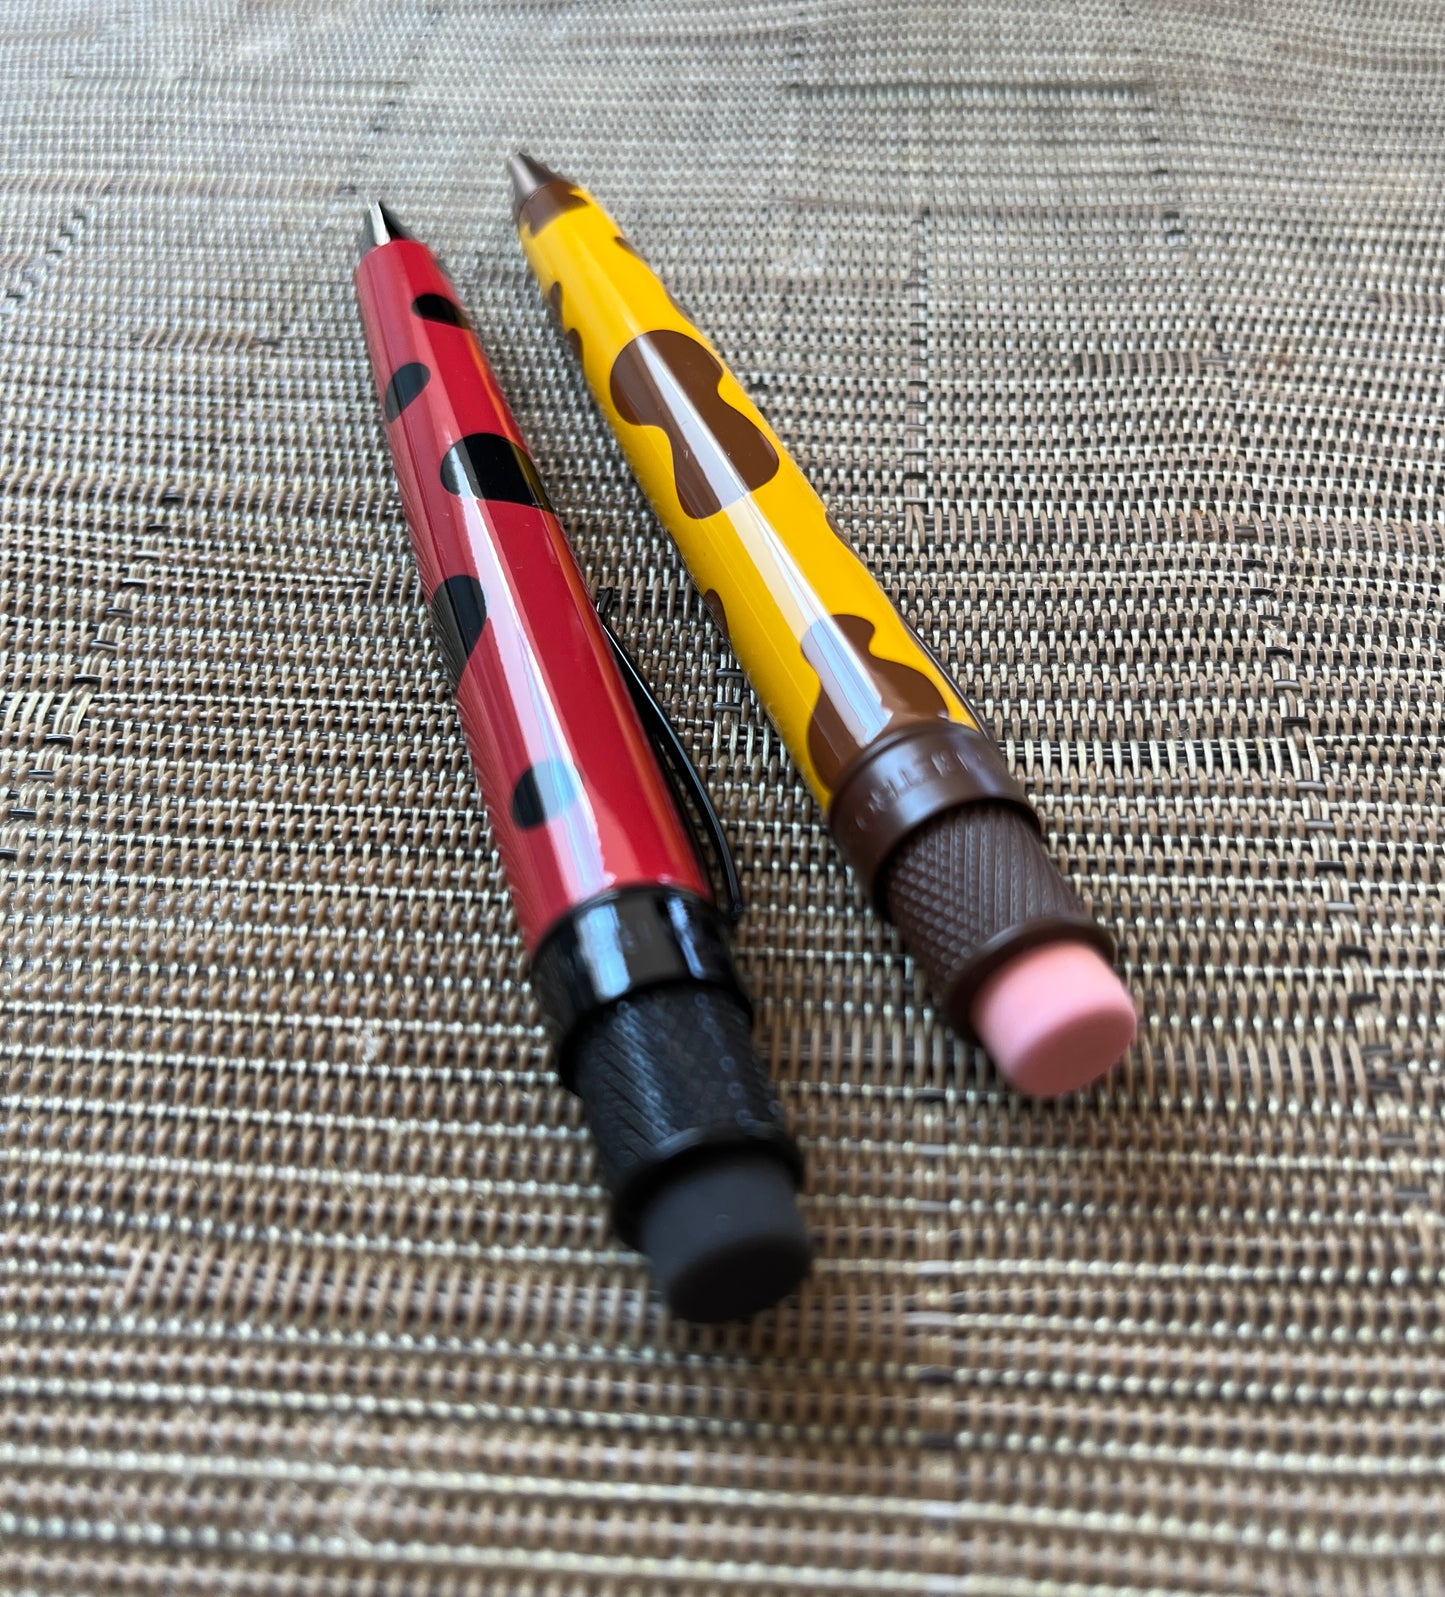 Retro 51 Tornado Pencil's - Goldy and Lucky MATCHING NUMBERS